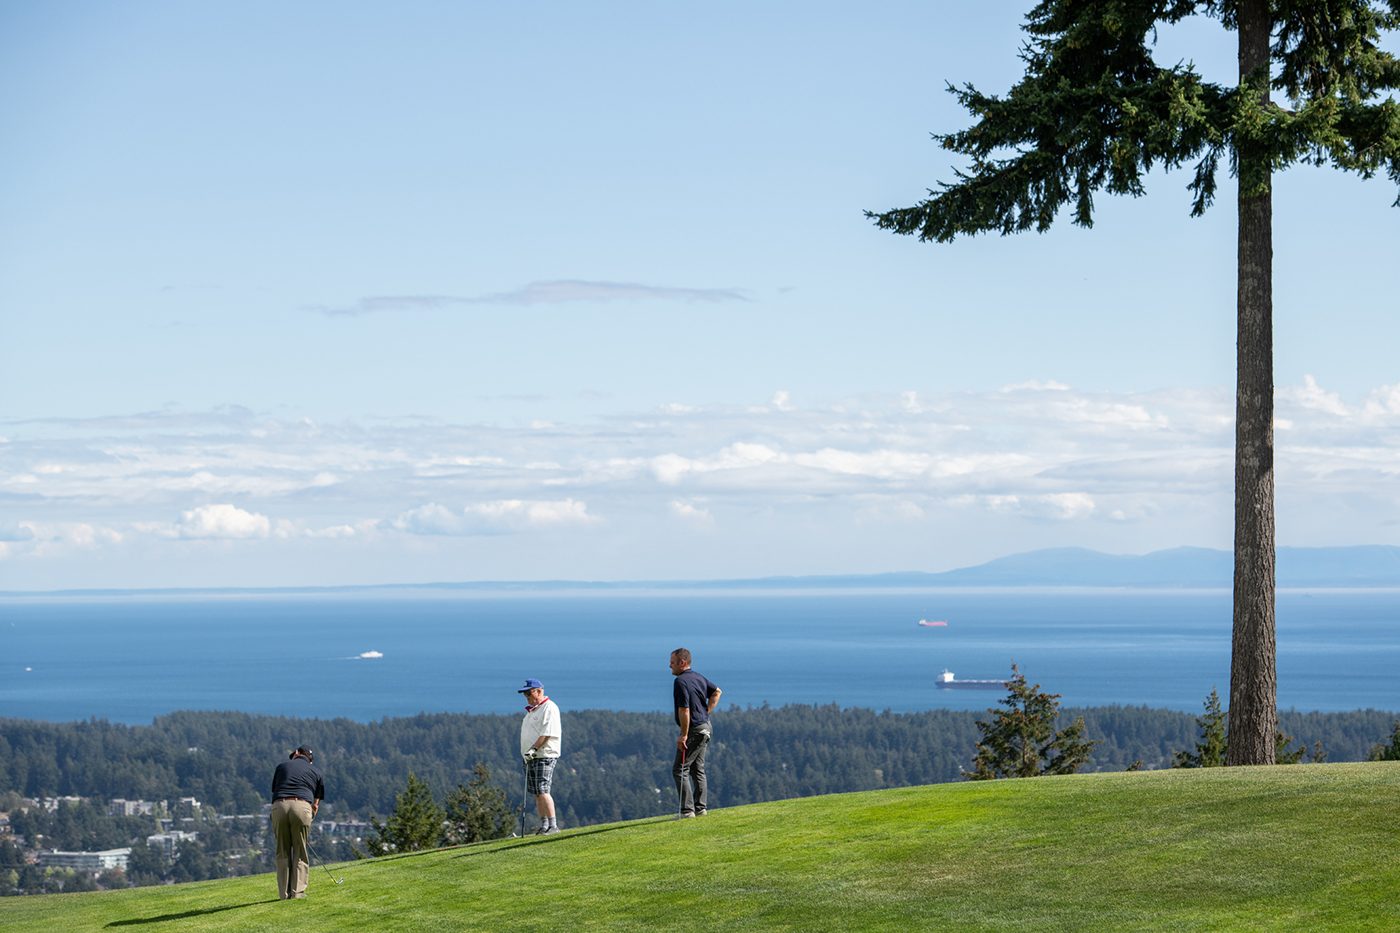 <p>That mild climate also makes Victoria one of the few spots in Canada where you can golf every month of the year. Canada’s only 36-hole Nicklaus Design course can be found at <a href="https://bearmountain.ca/" rel="noopener noreferrer">Bear Mountain</a>, while other courses are renowned for their awe-inspiring views of the Olympic Mountains and the Pacific. An abundance of local wineries, breweries and spas offer all the rejuvenating therapies that elevate a golf trip from "good" to "unforgettable."</p> <p>Check out 13 great <a href="https://www.readersdigest.ca/travel/canada/great-canadian-golf-courses/">Canadian golf courses under $100</a>.</p>